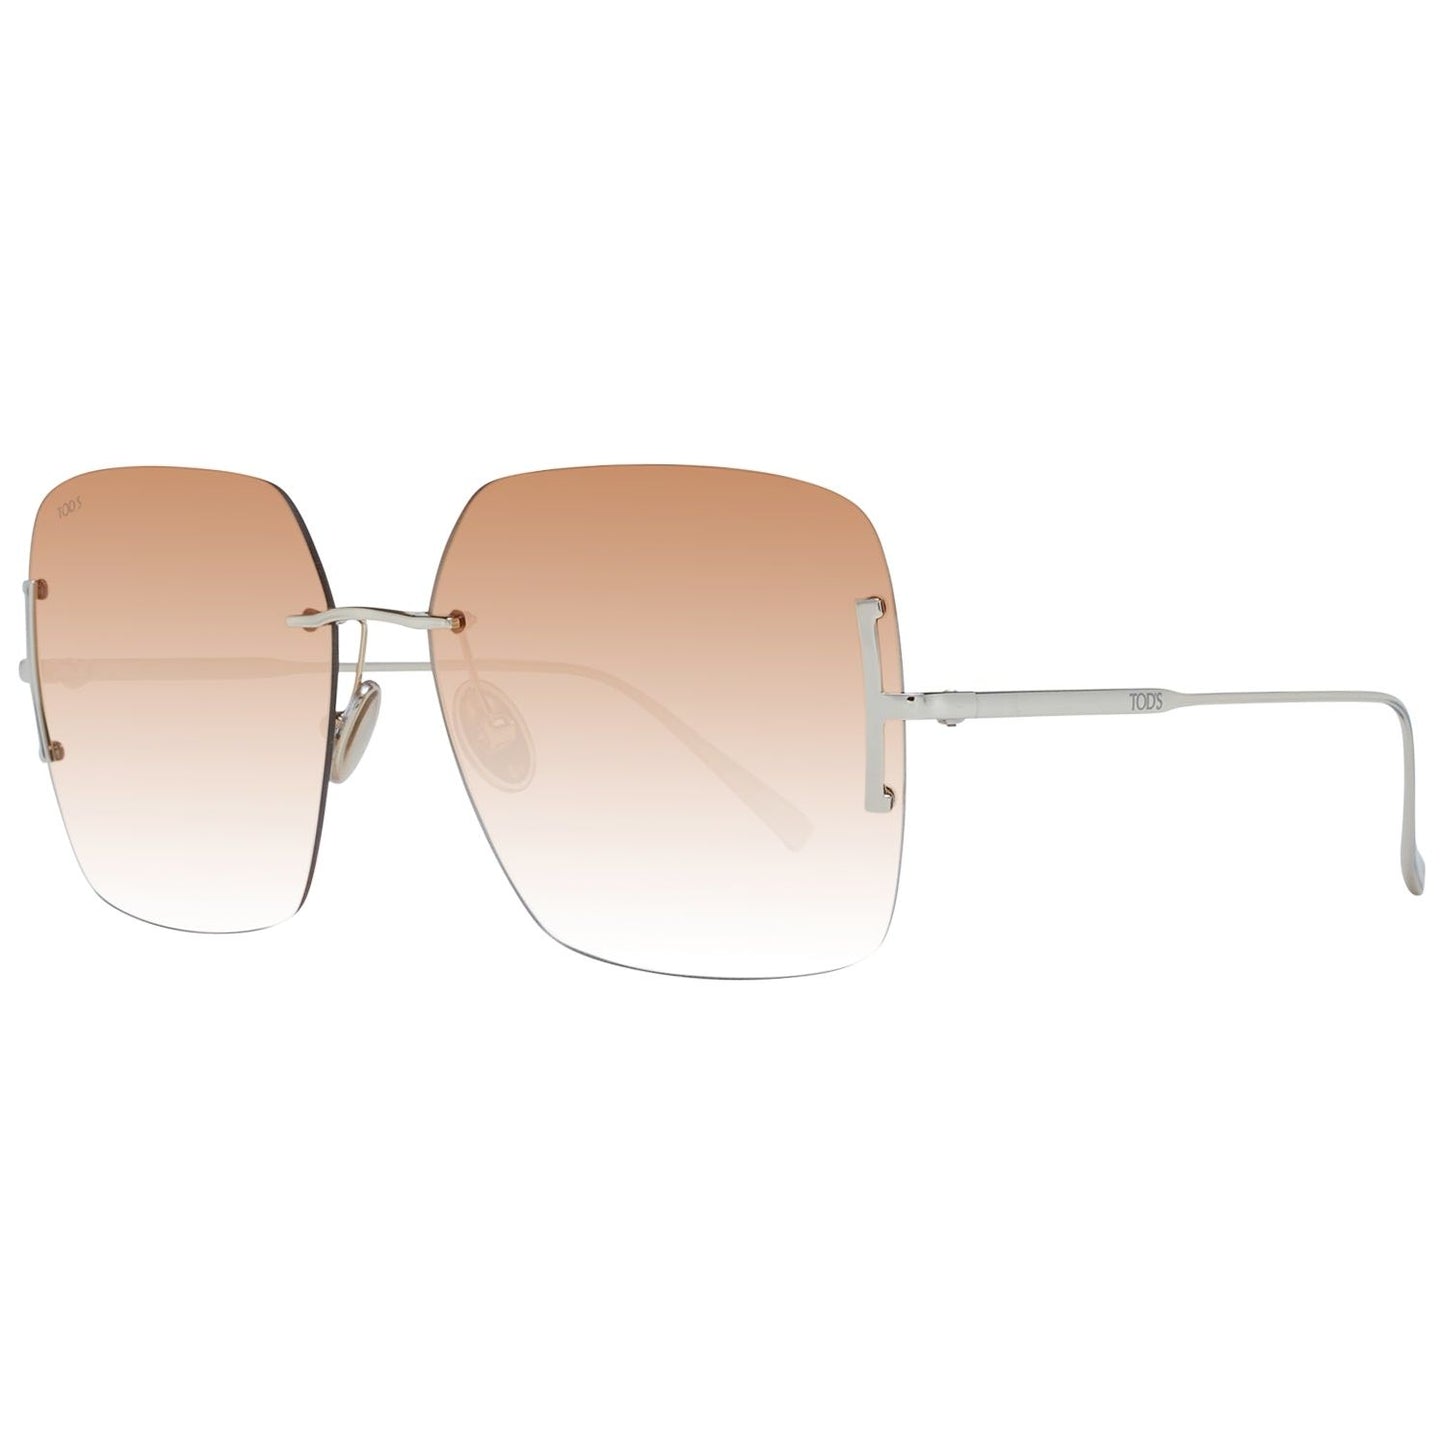 TODS SUNGLASSES TODS MOD. TO0325 6132F SUNGLASSES & EYEWEAR tods-mod-to0325-6132f